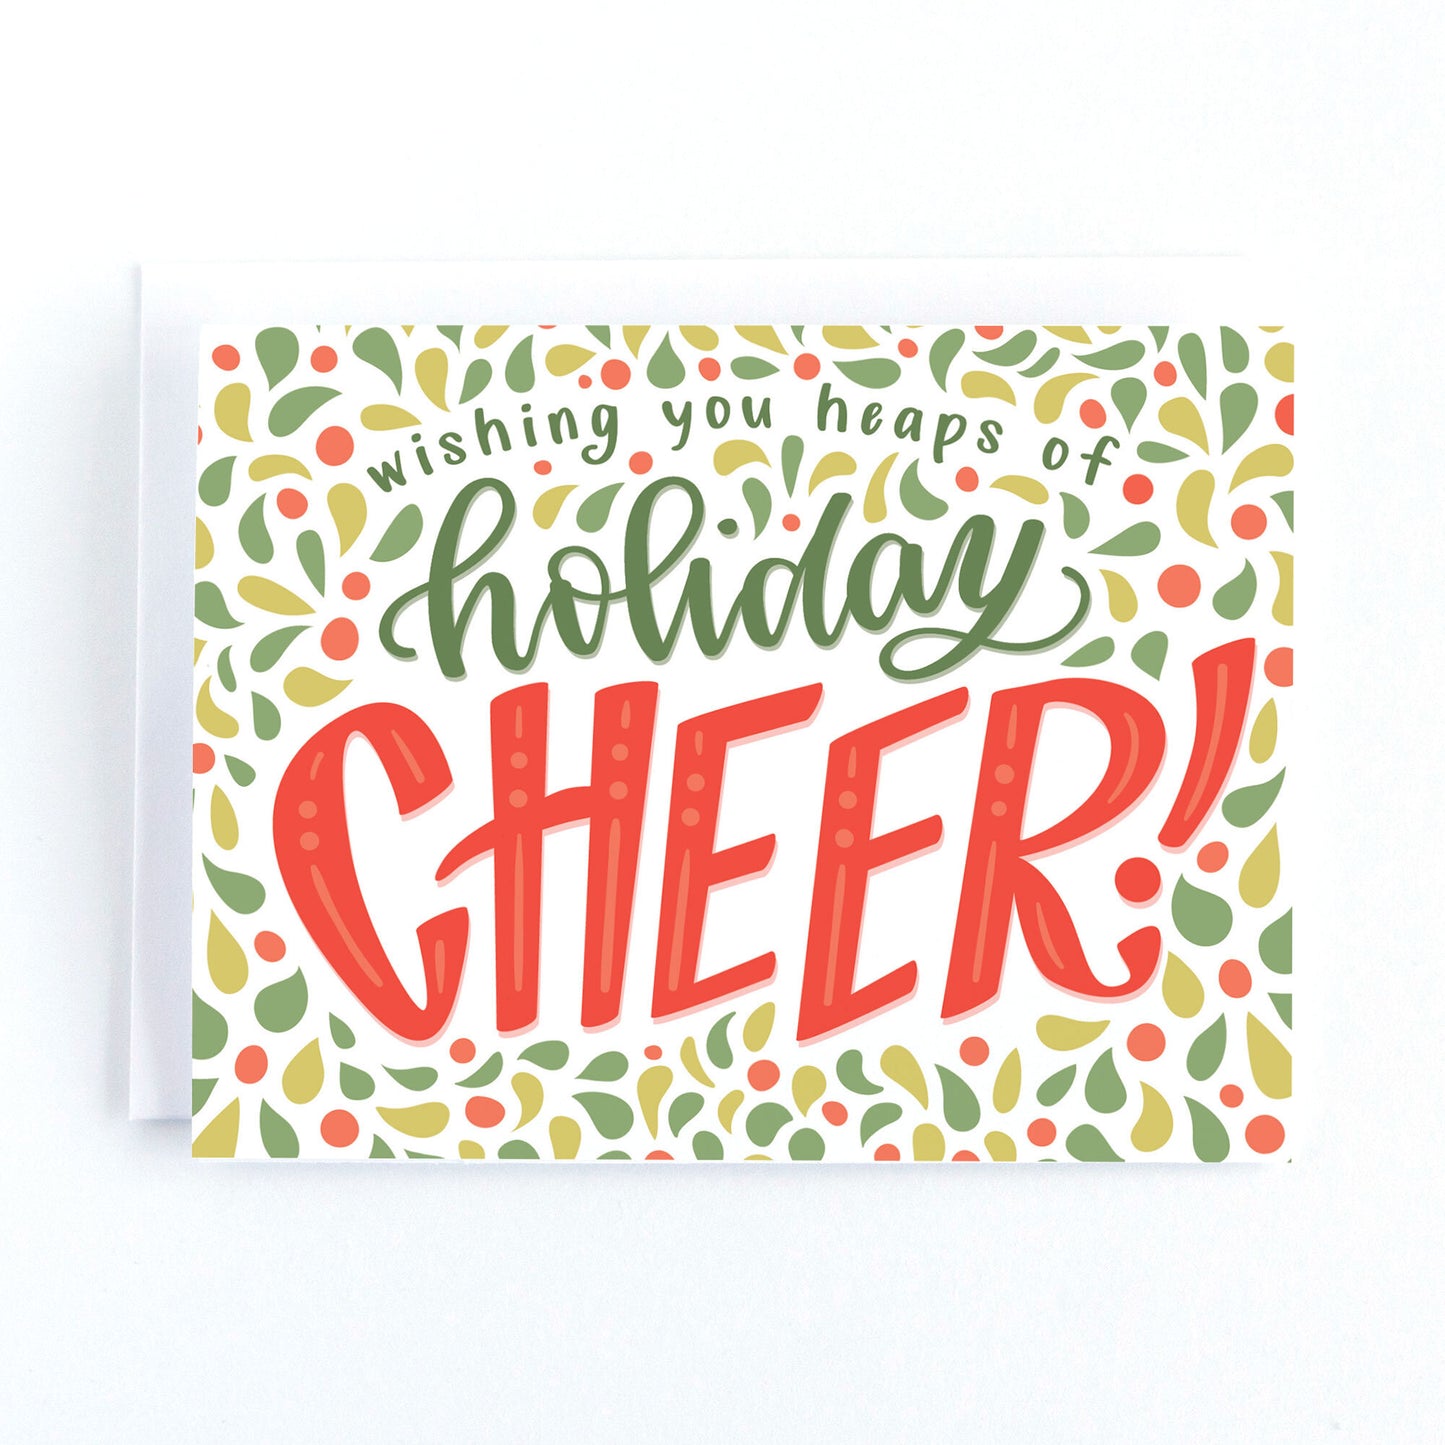 Christmas card featuring playful lettering, and intricate border and text the says, wishing you heaps of holiday cheer in a traditional red and green colour palette.